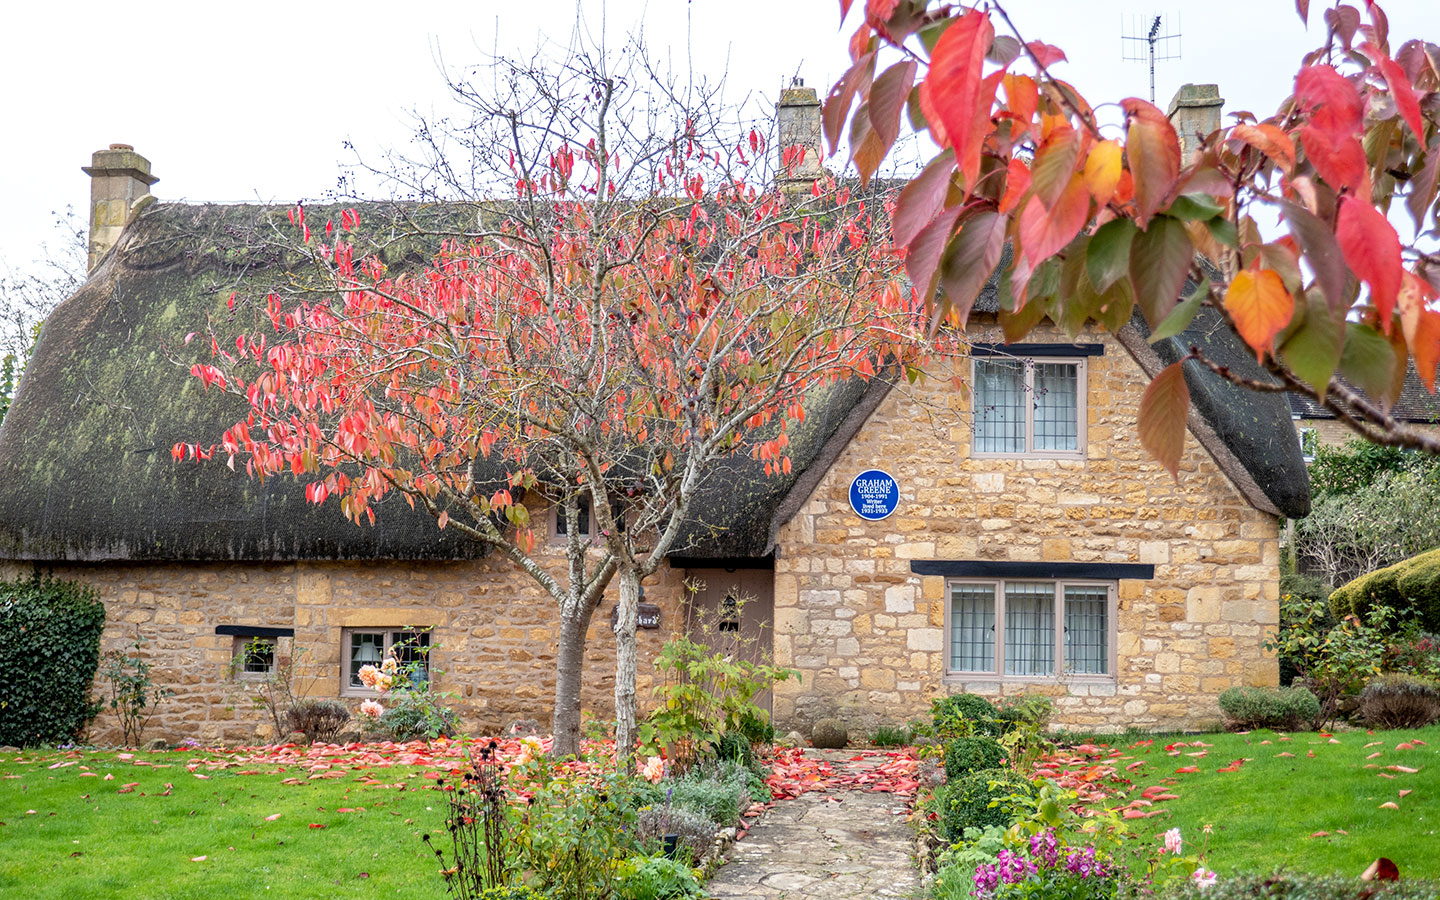 Author Graham Greene's former home in Chipping Campden